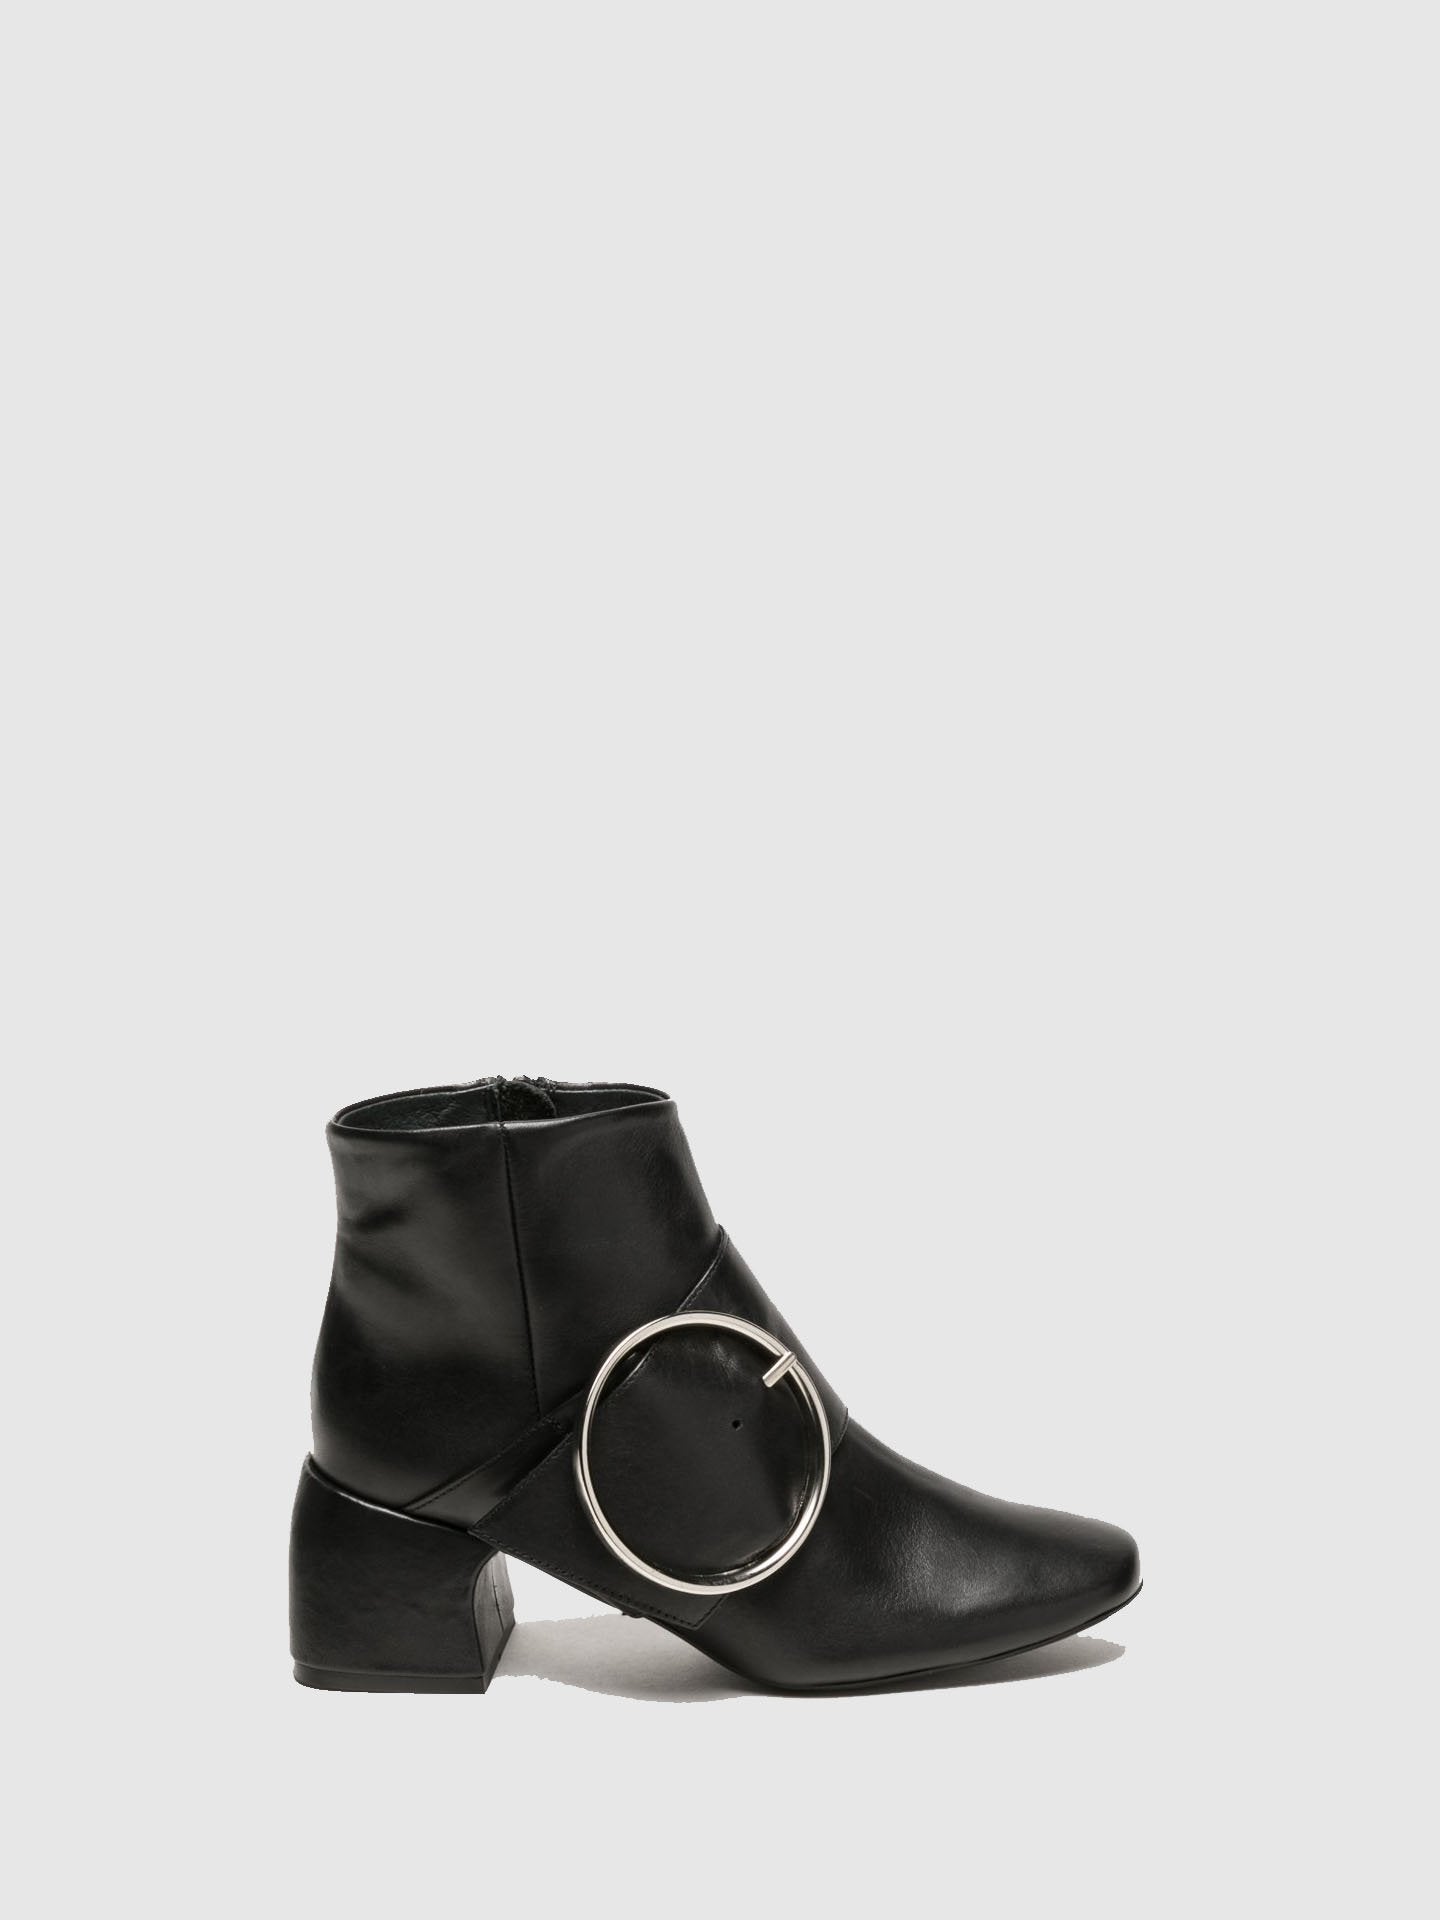 Foreva Black Buckle Ankle Boots